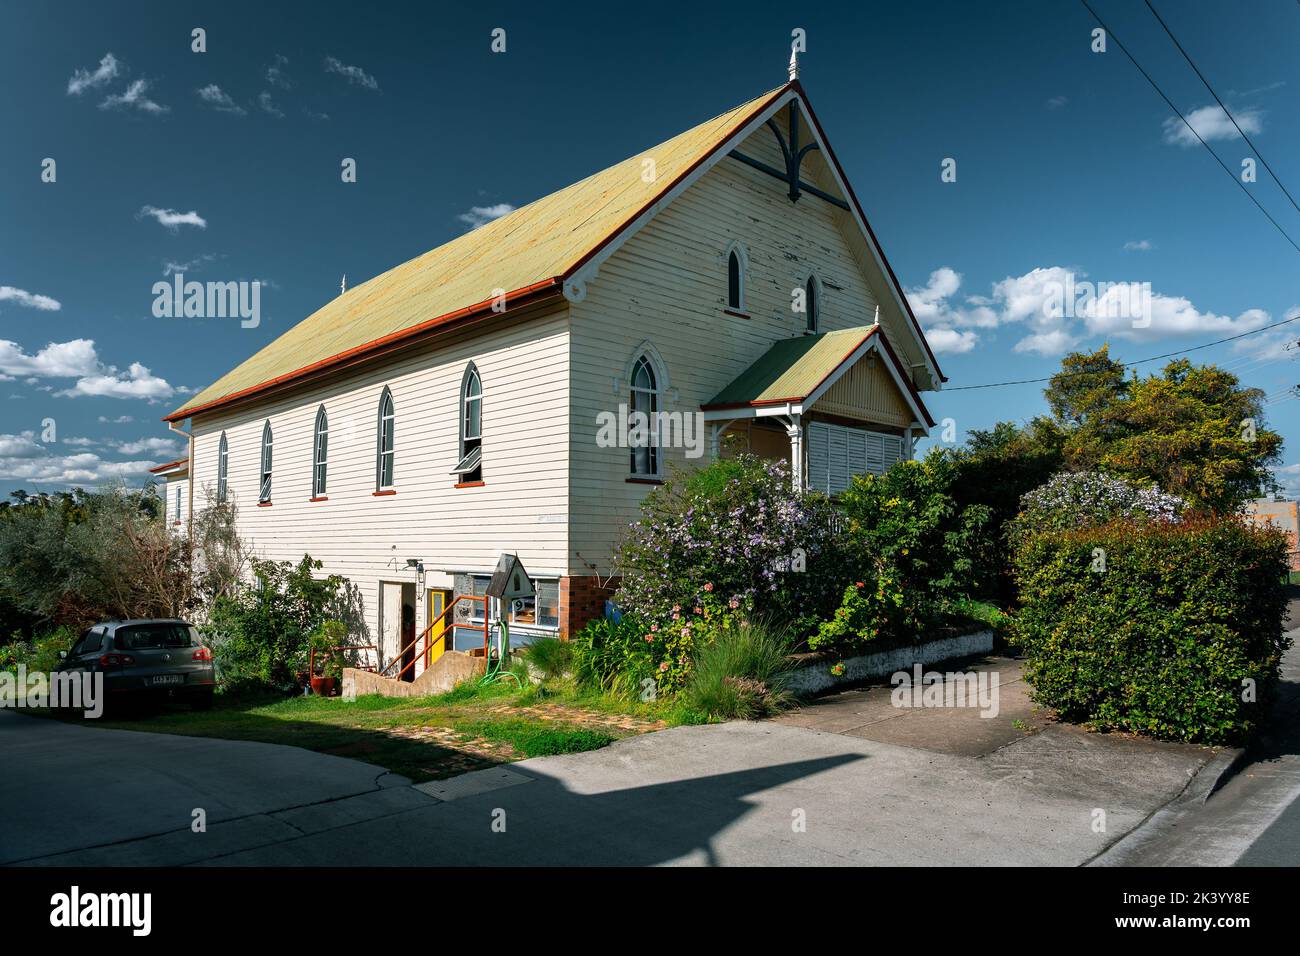 Boonah, Queensland, Australia - Historical timber church building Stock Photo